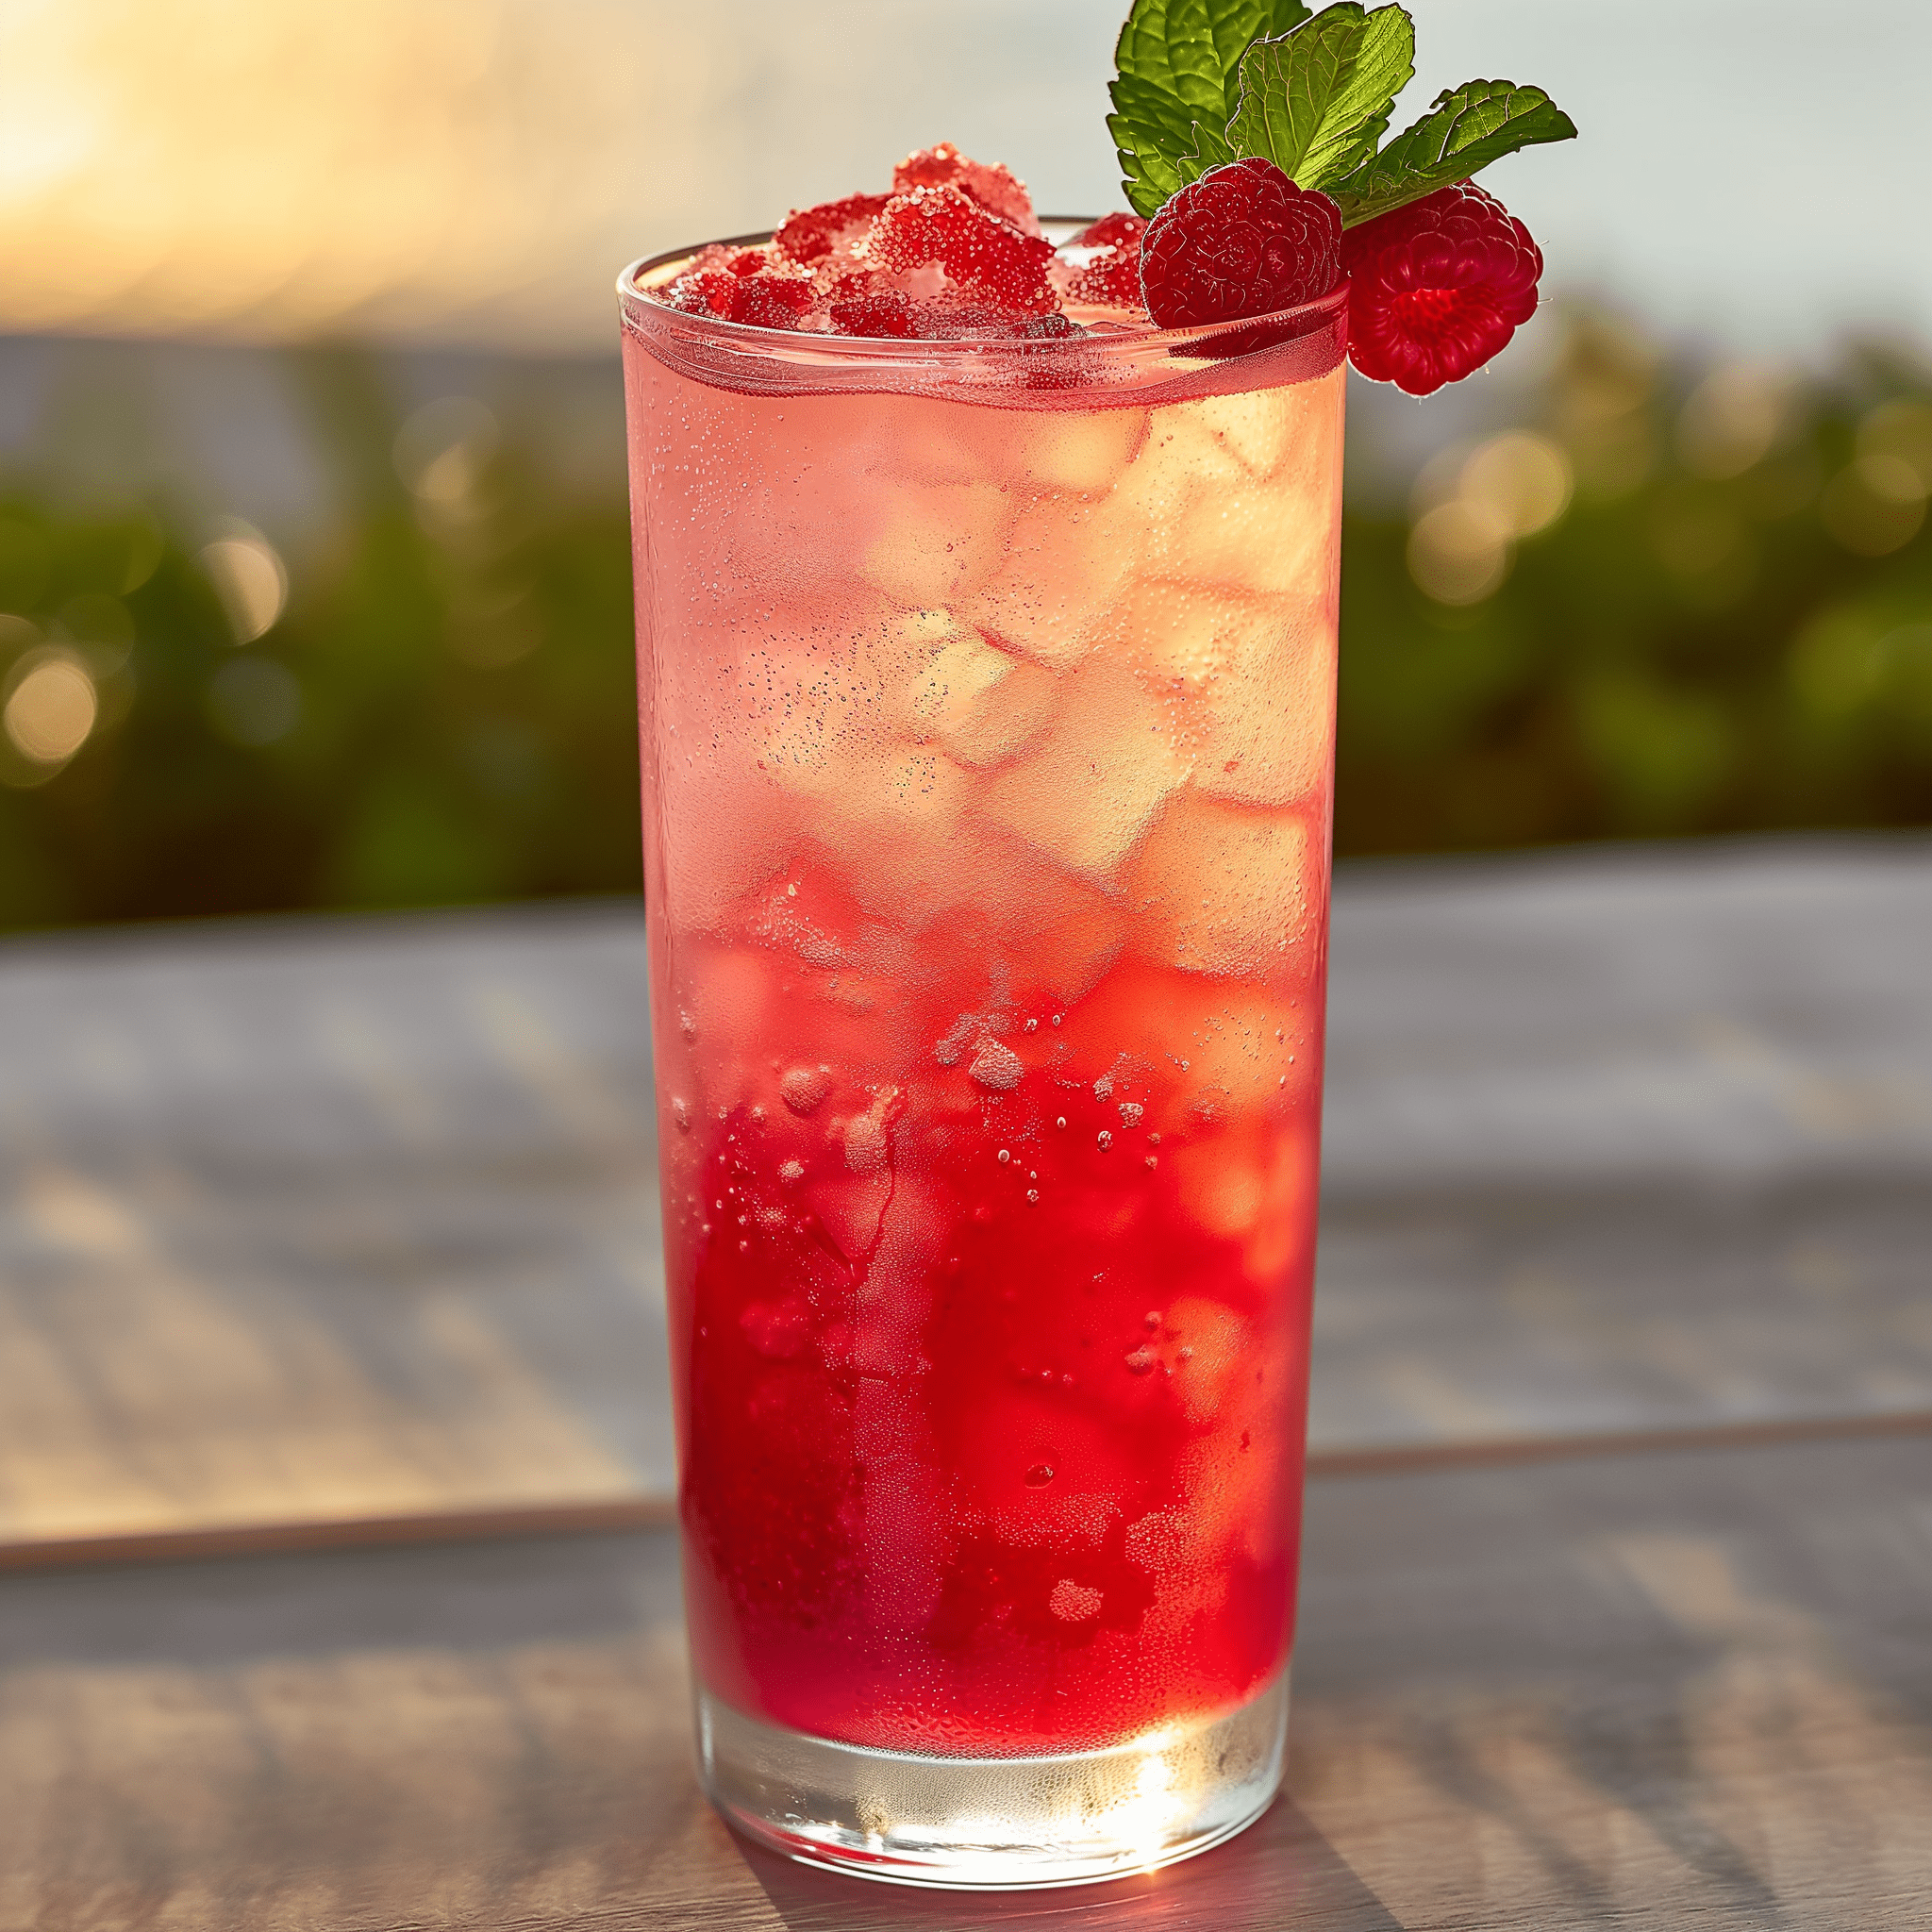 Raspberry Lemonade Cocktail Recipe - The Raspberry Lemonade cocktail is a harmonious blend of sweet raspberries and tart lemon, creating a refreshingly zesty flavor that dances on the palate. It's light, invigorating, and has a subtle hint of mint that complements the fruitiness.